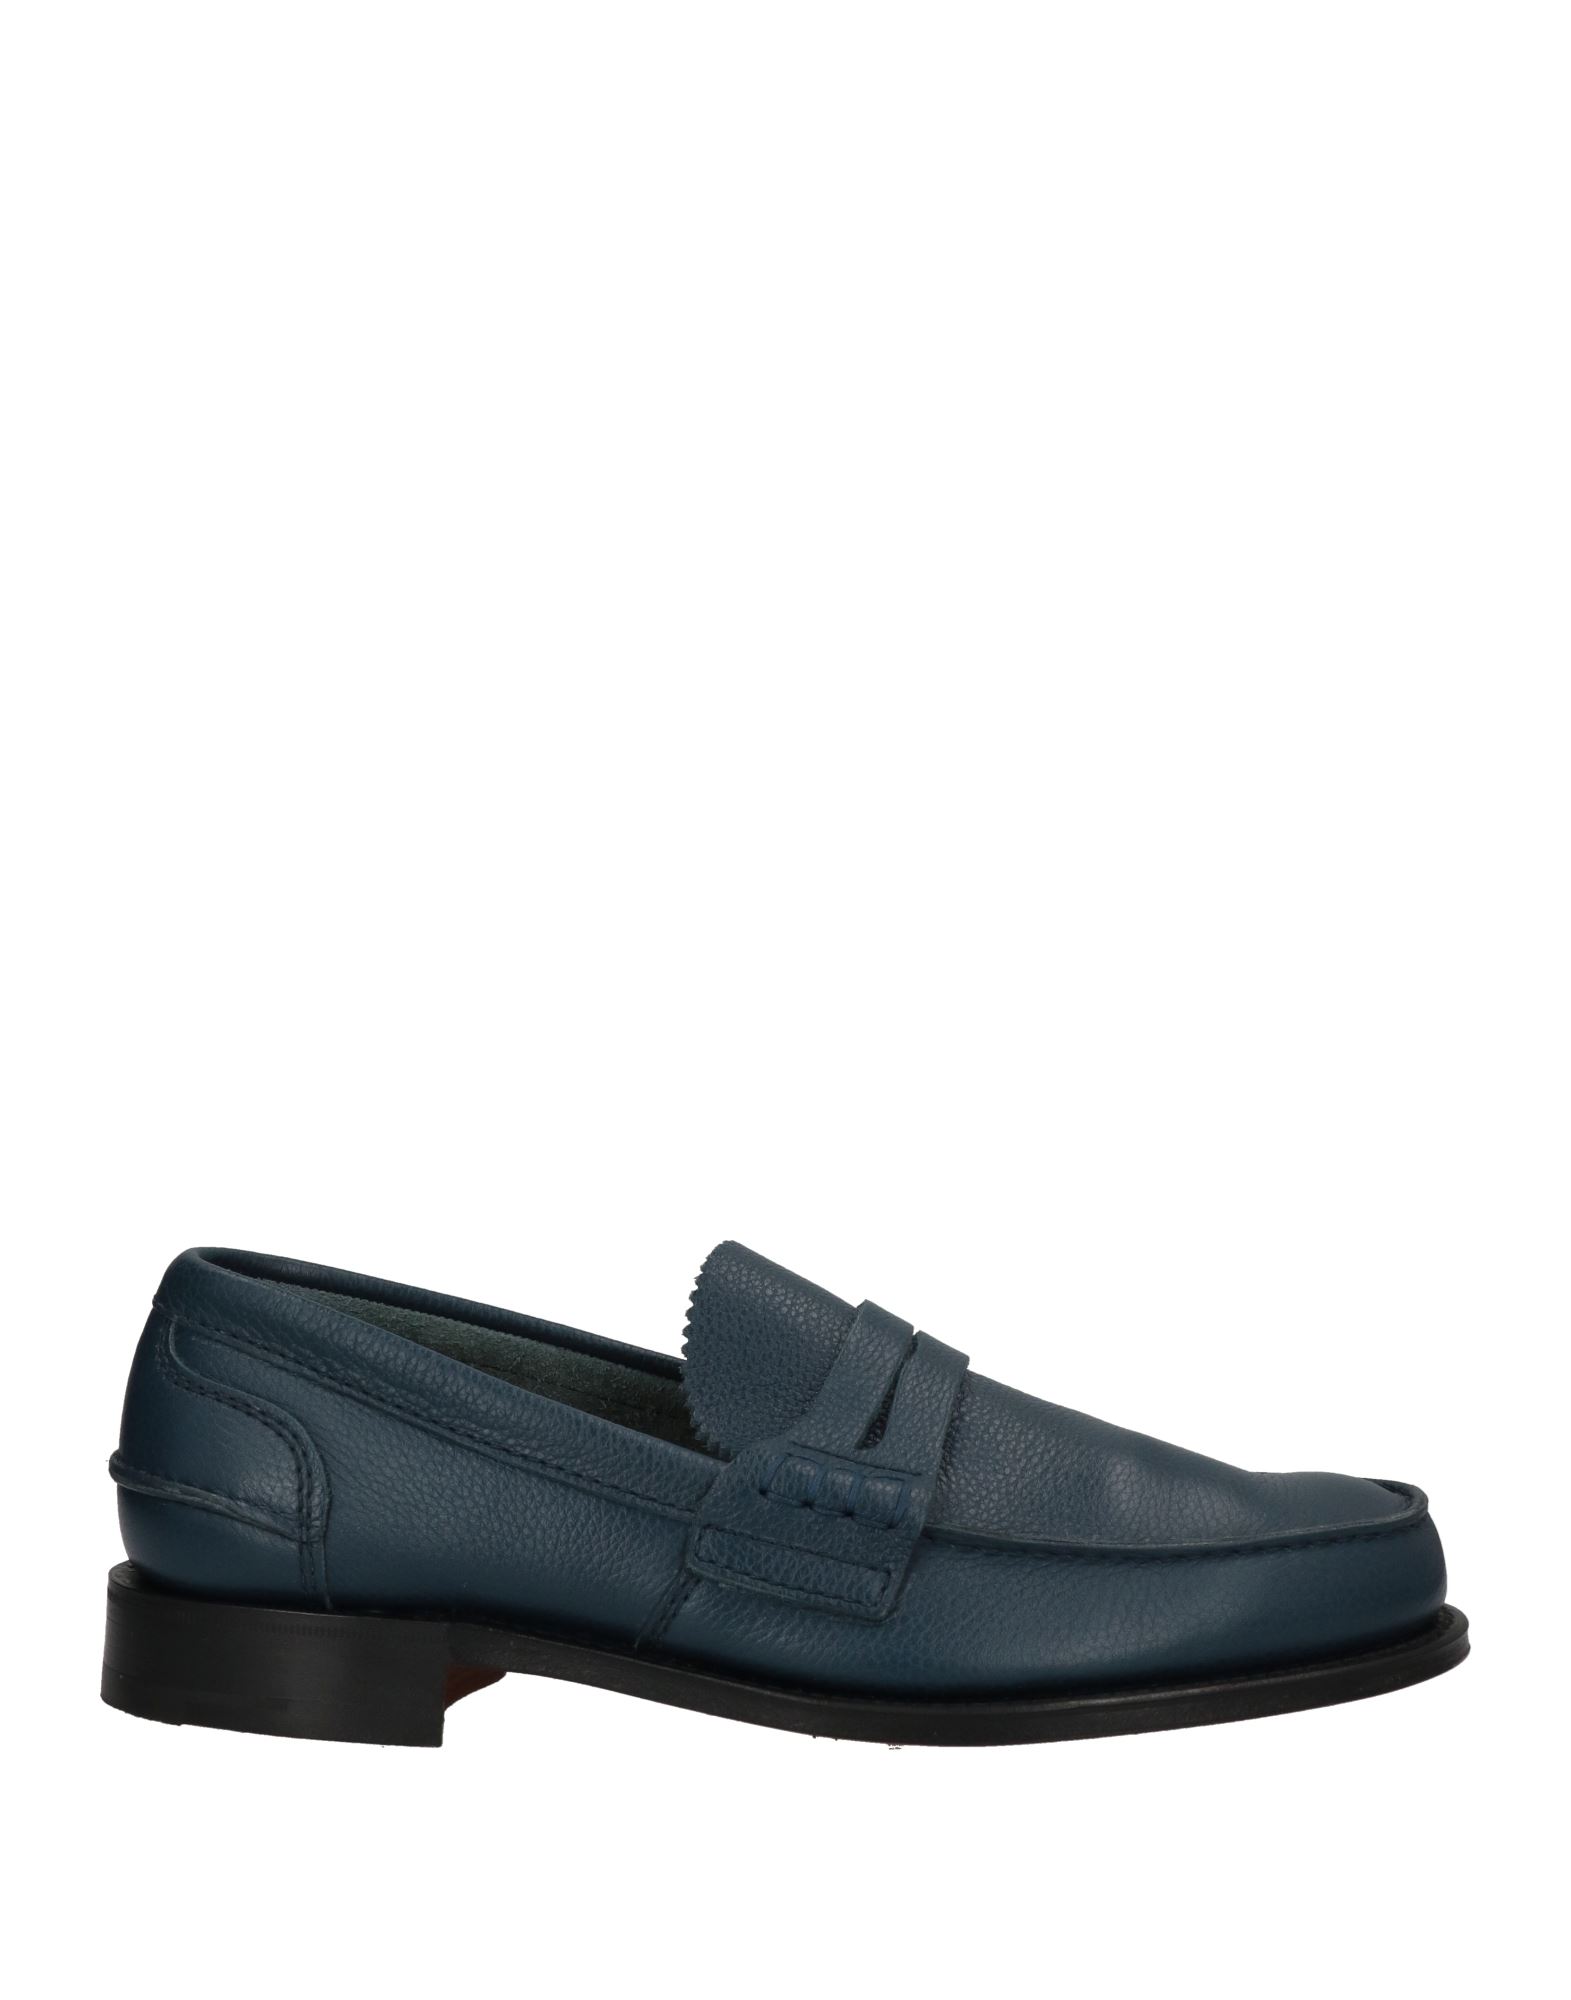 Church's Man Loafers Slate Blue Size 11.5 Soft Leather In Navy Blue